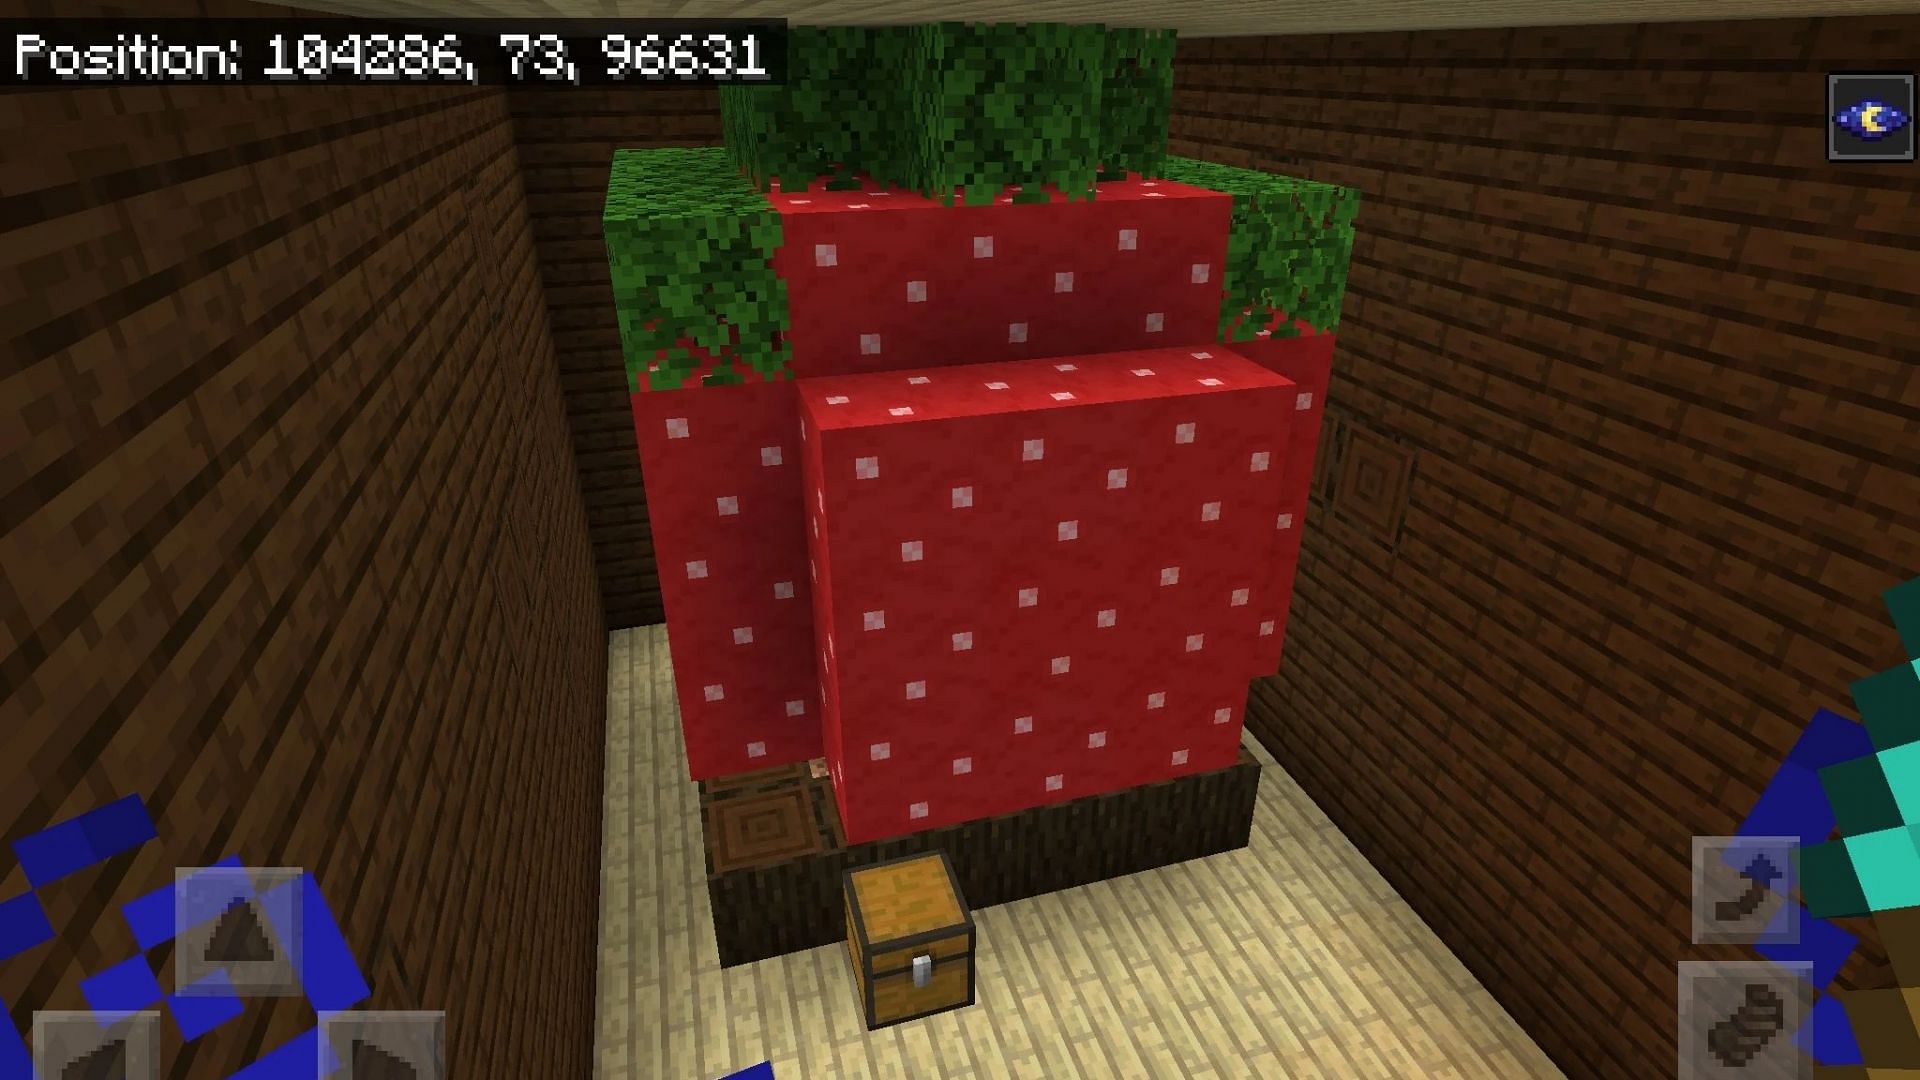 There will be several hidden chests found in the Woodland Mansion. (Image via Minecraft Wiki)